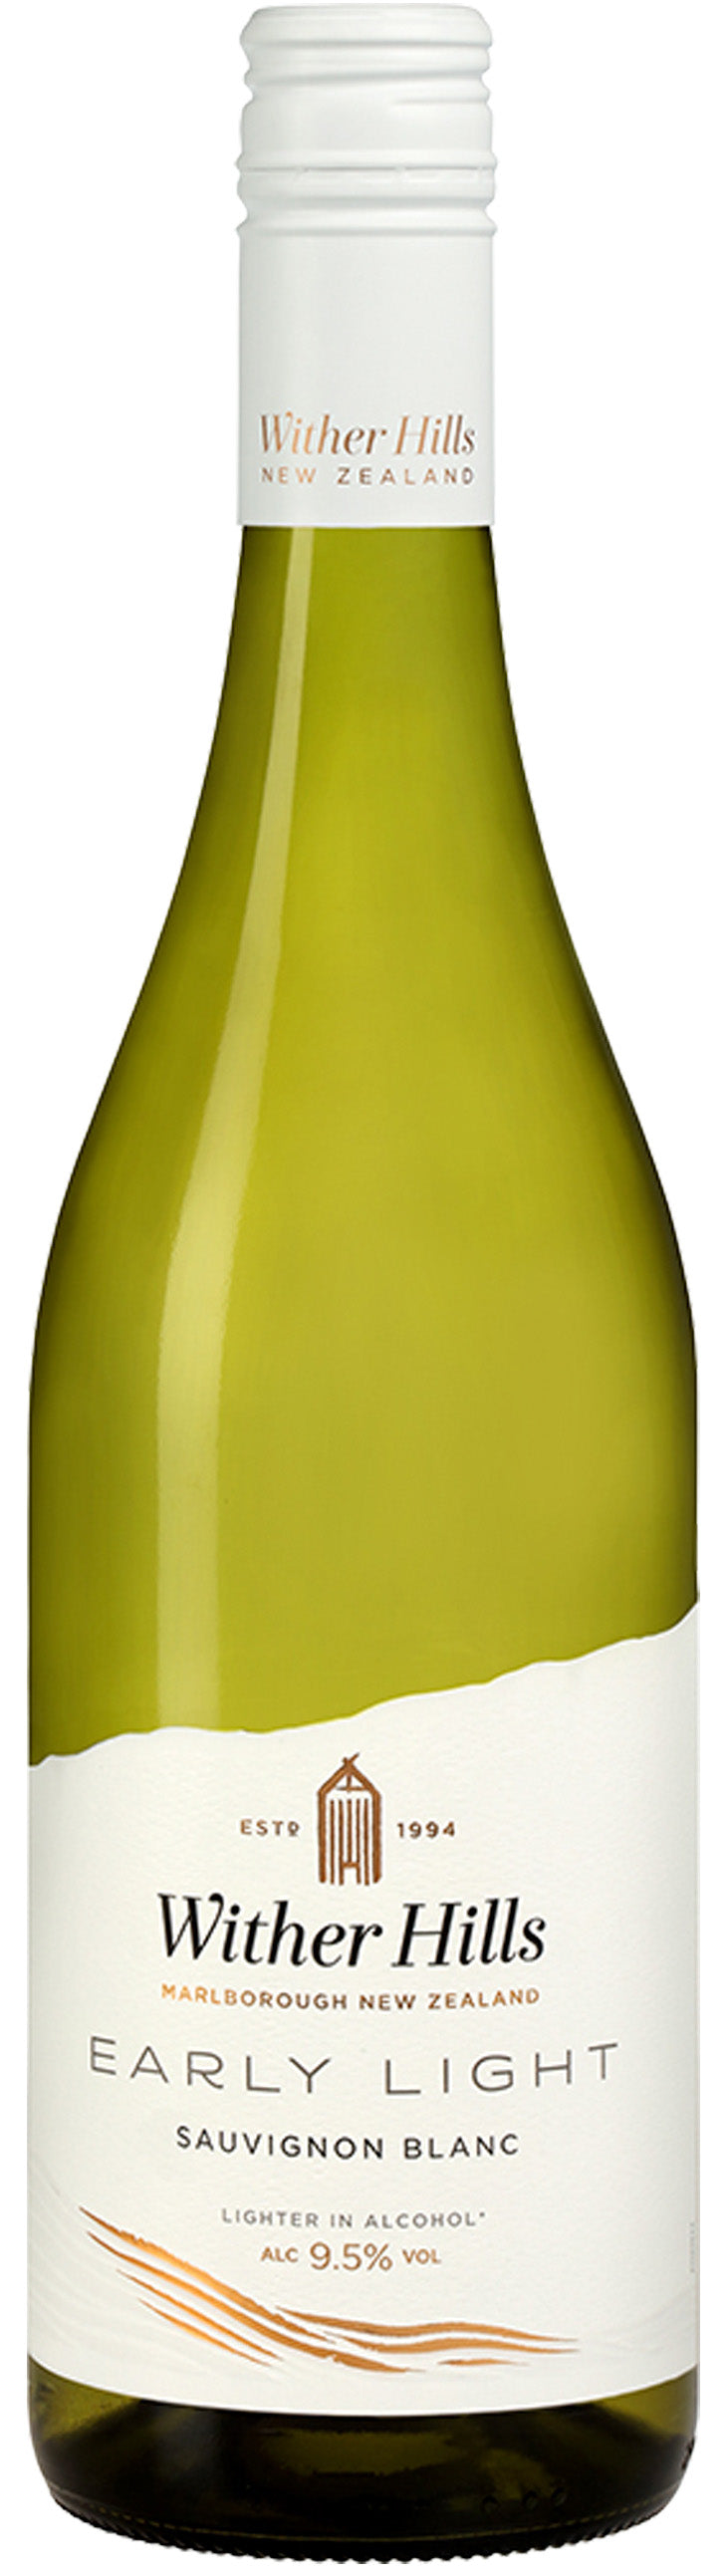 Wither Hills Early Light Sauv Blanc